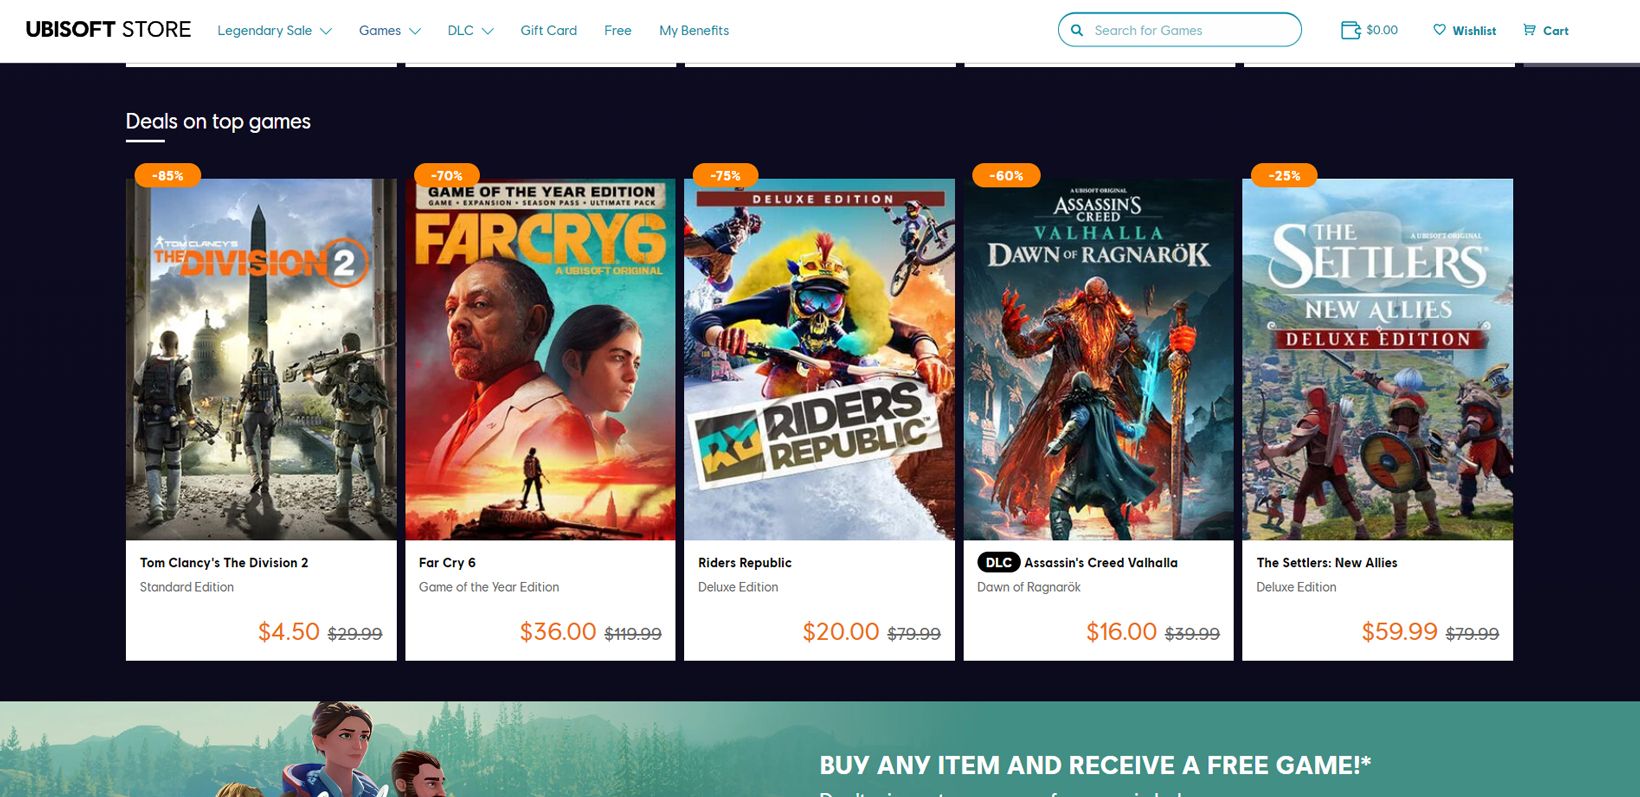 Ubisoft Store with a few games on sale